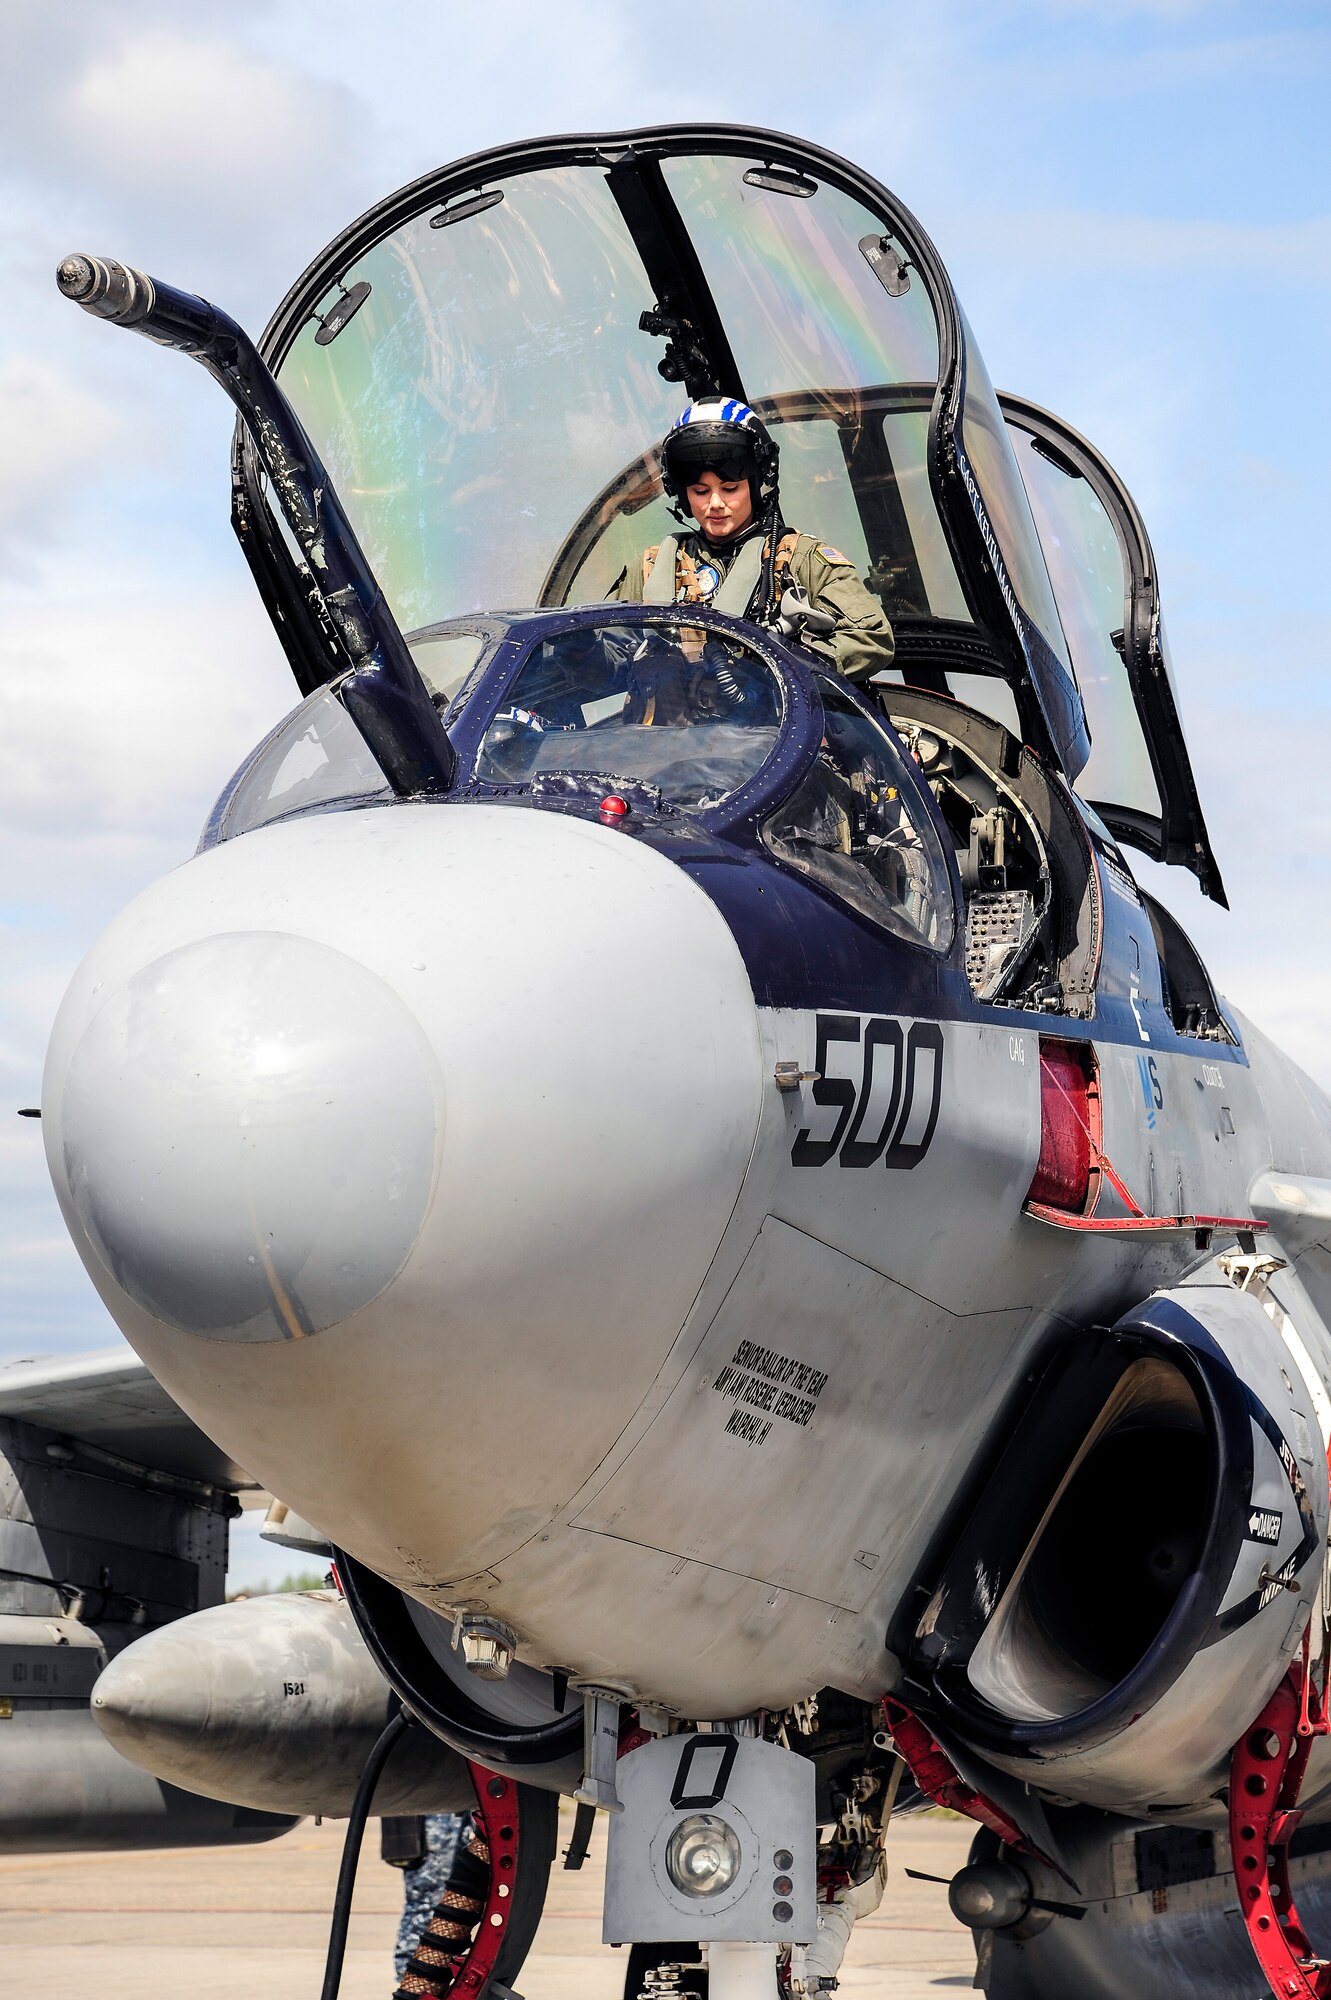 U.S. Navy Lt. Candice Nunley, an EA-6B Prowler pilot from the Electronic Attack Squadron 142, Naval Air Station Whidbey Island, Oak Harbor, Wash., enters the cockpit in preparation for a training sortie during RED FLAG-Alaska 14-1 May 21, 2014, Eielson Air Force Base, Alaska. RF-A is a Pacific Air Forces-directed field-training exercise designed to train U.S. and coalition forces in a realistic combat environment. (U.S. Air Force photo by Senior Airman Zachary Perras/Released)